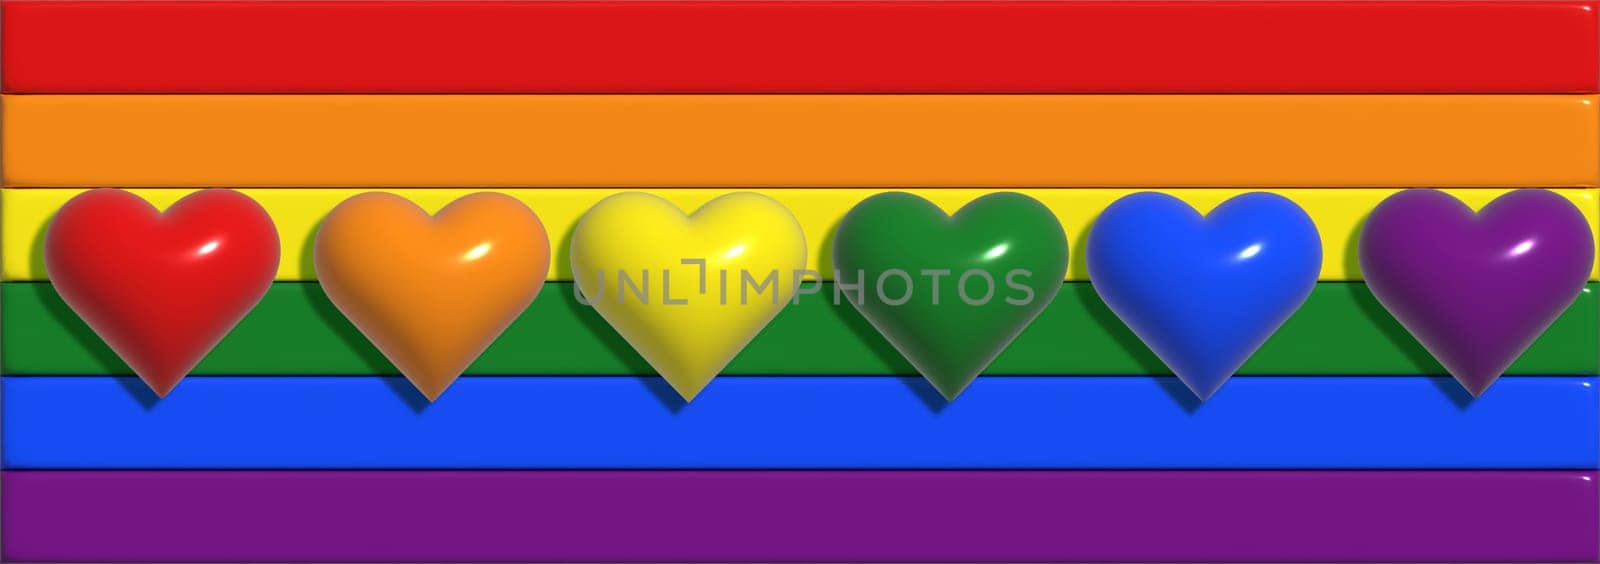 Multi-colored flag is a symbol of LGBT social movements, reflecting the diversity of the LGBT community and the spectrum of human sexuality and gender. 3D rendering illustration by ndanko